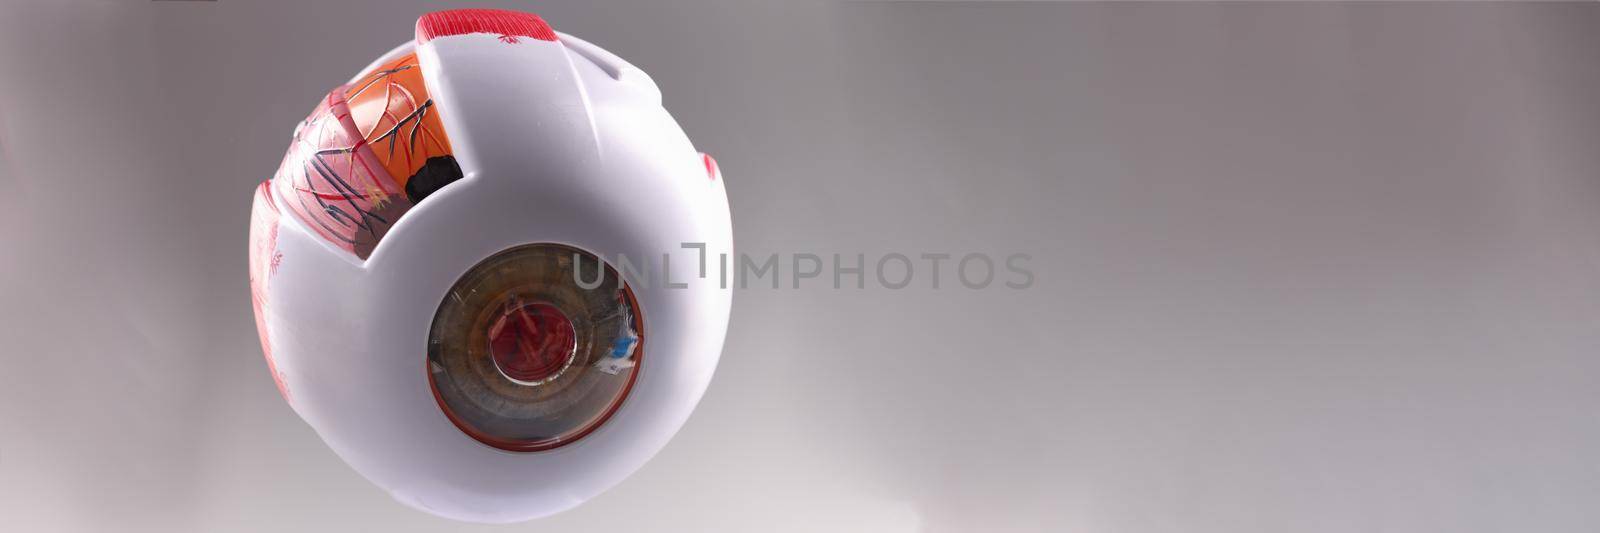 Artificial model of human eye on gray background by kuprevich